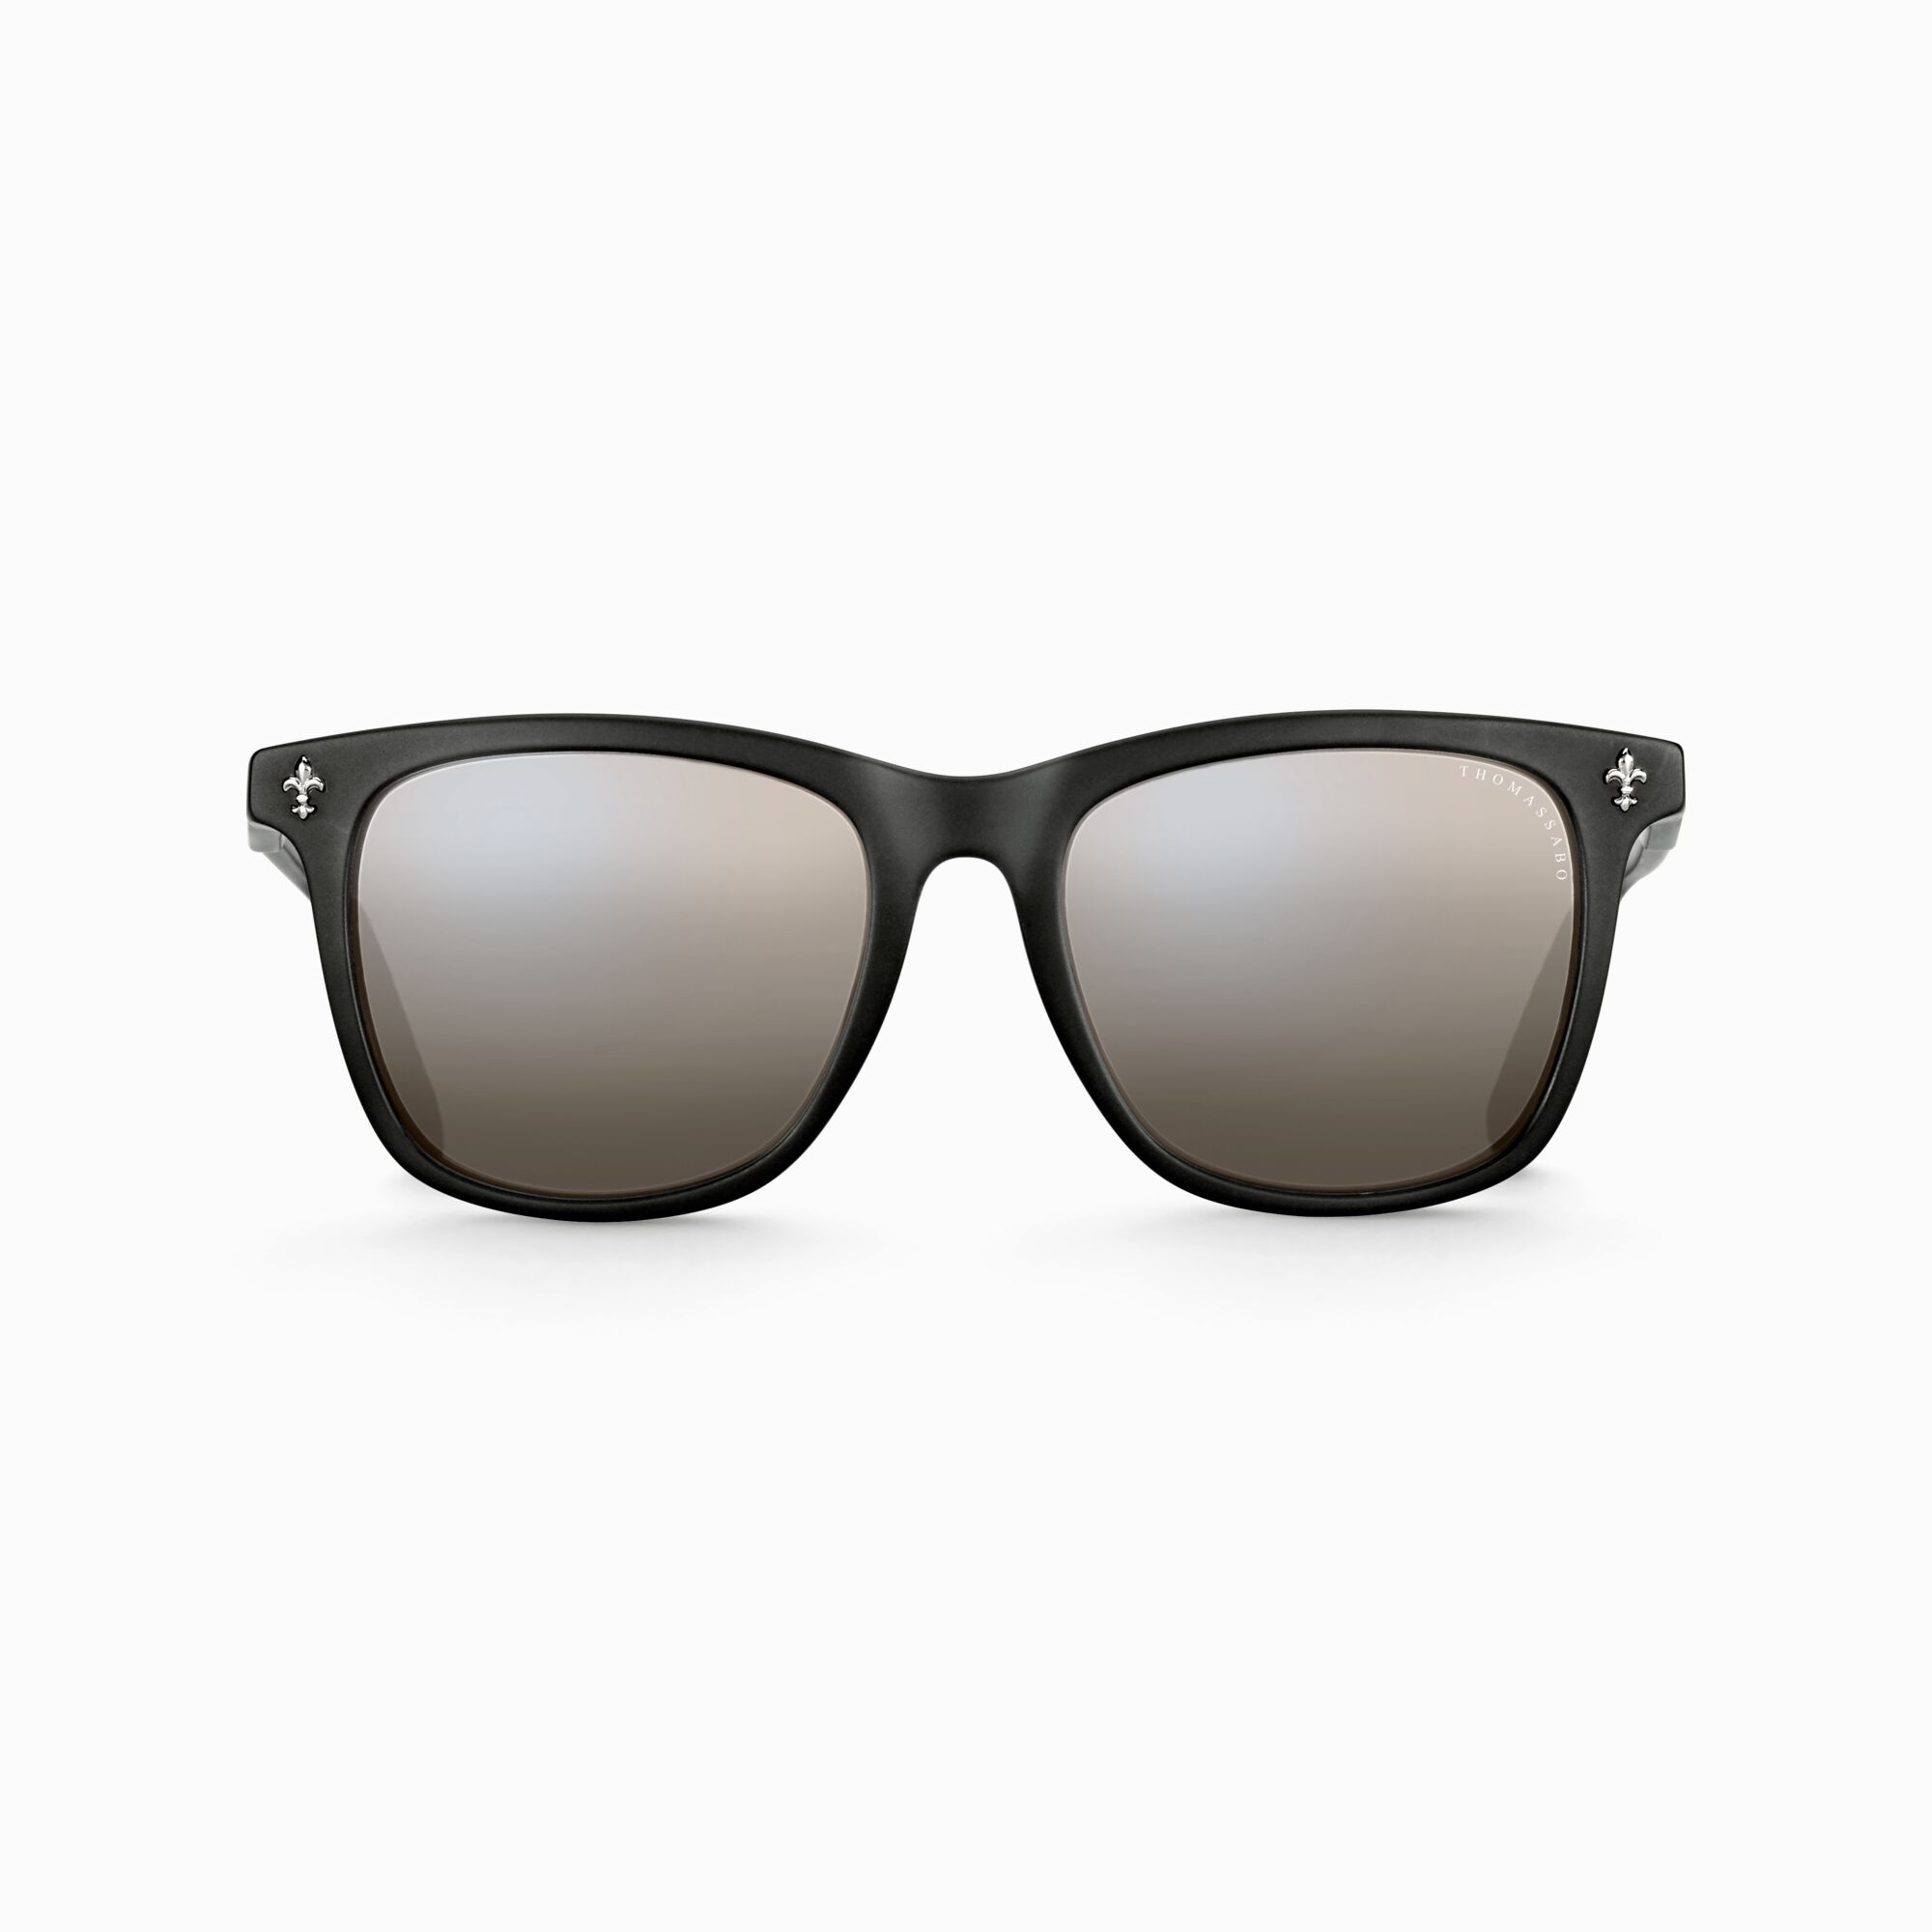 Sunglasses Marlon square lily polarised mirrored from the  collection in the THOMAS SABO online store